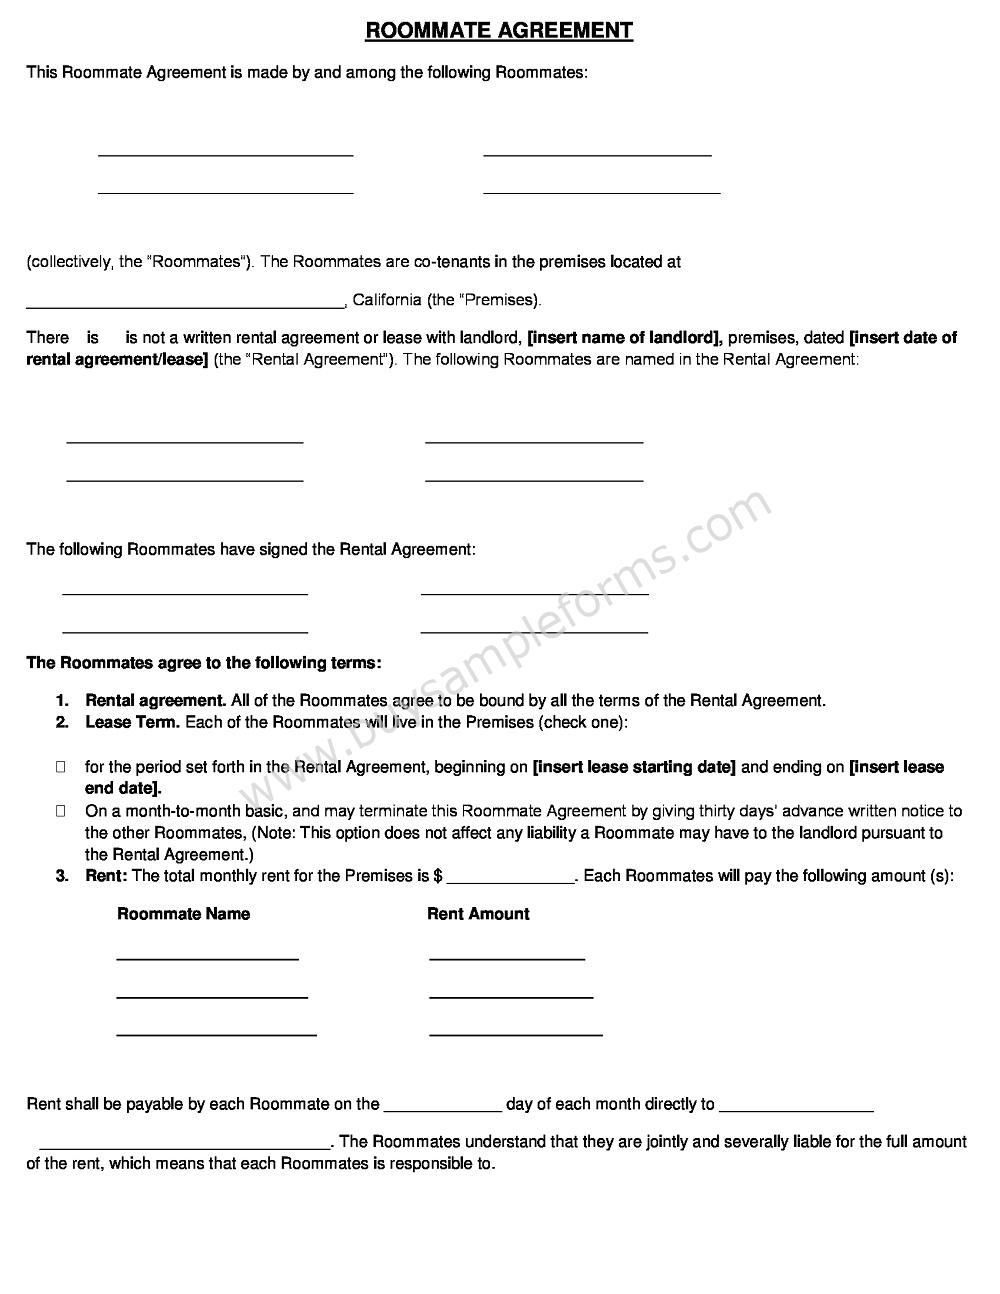 Sample Roommate Rental Agreement Form Template Word Doc